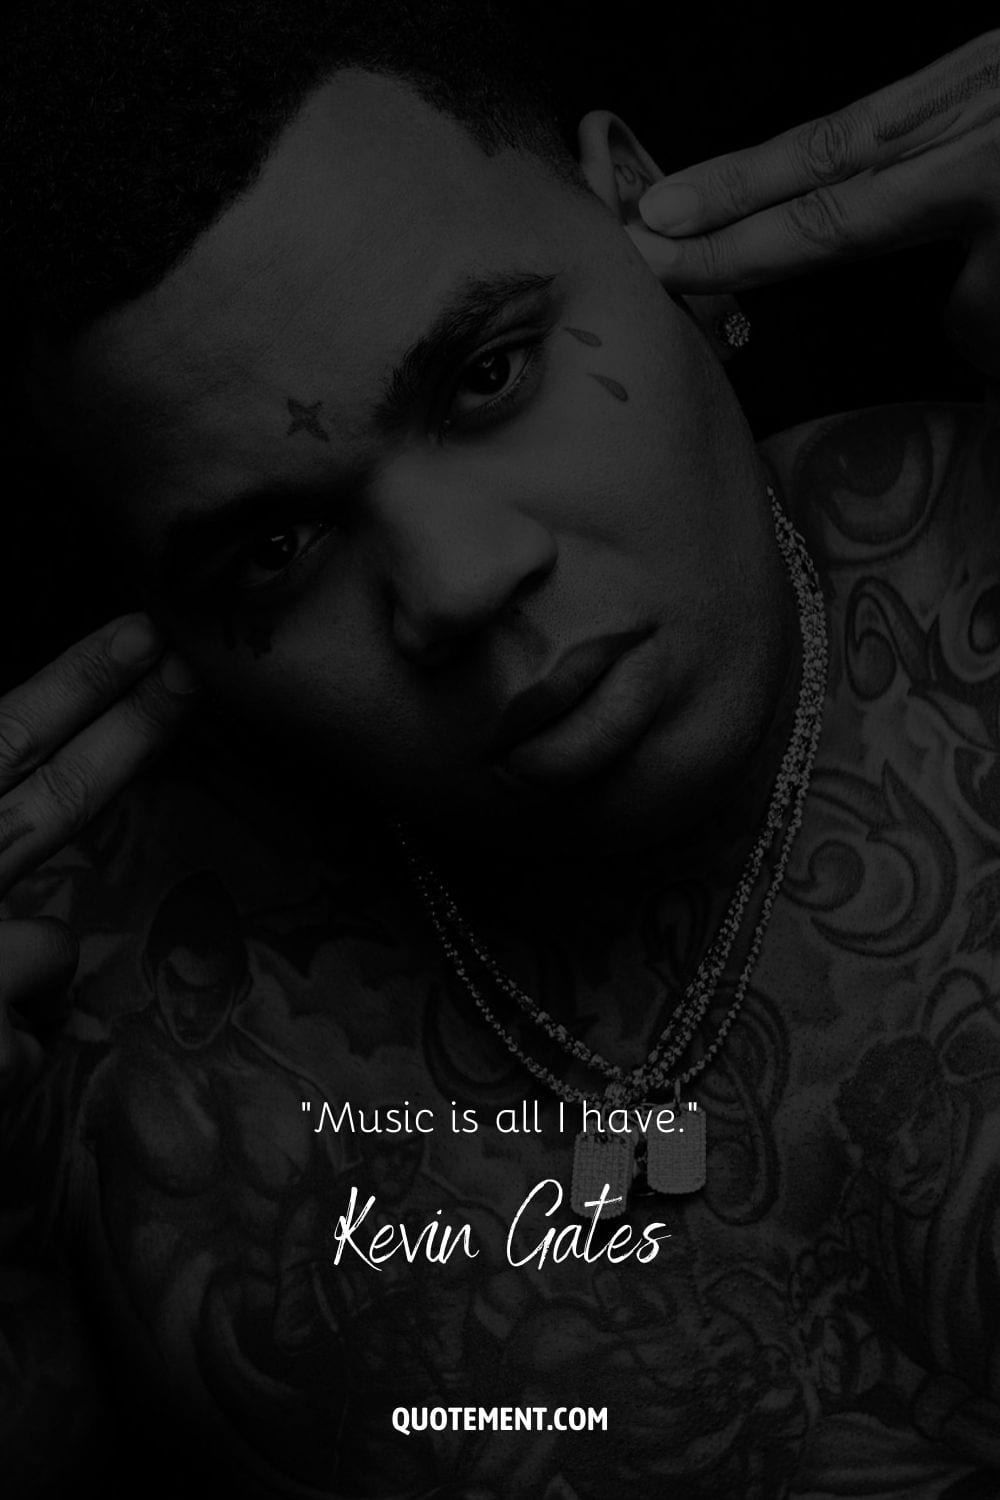 “Music is all I have.” – Kevin Gates